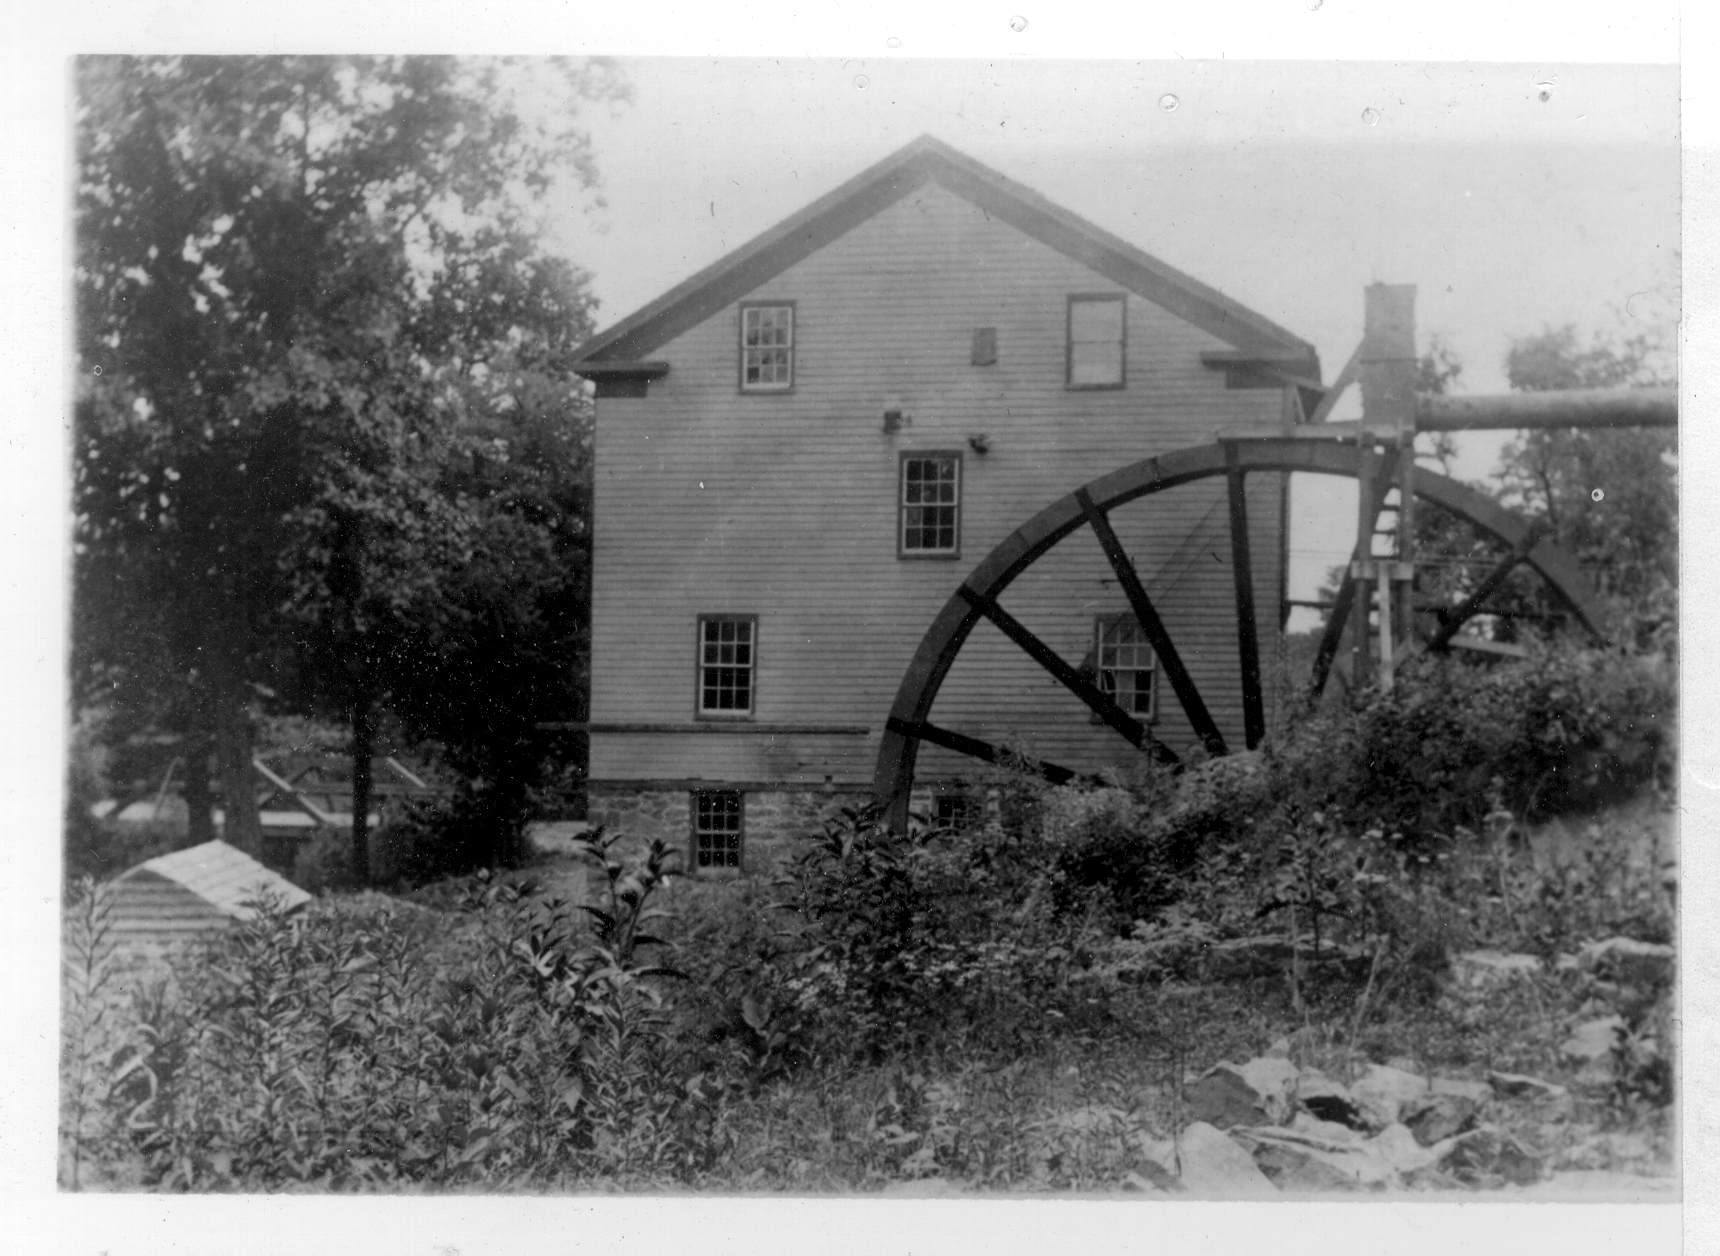 Higher resolution photo of the Barcroft Mill